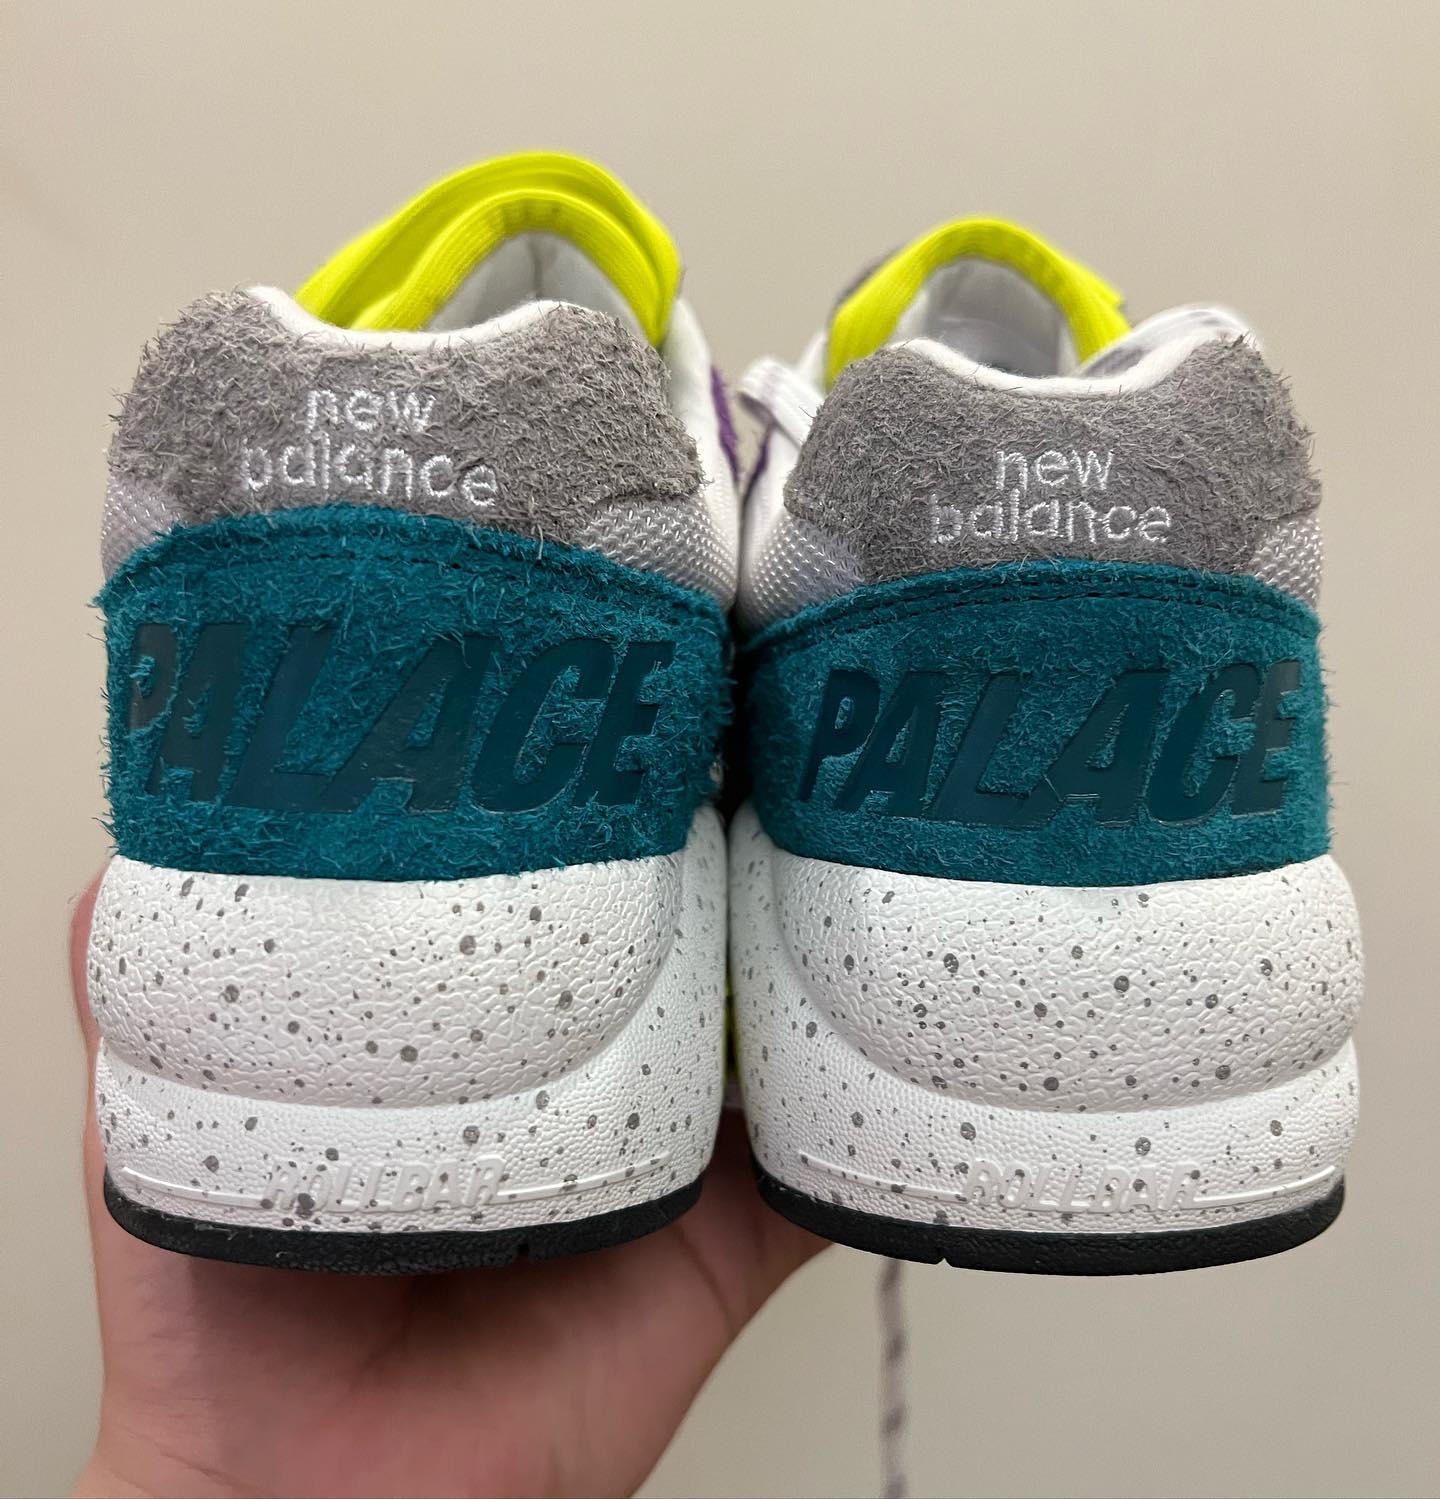 Palace New Balance MT580 Release Date Info